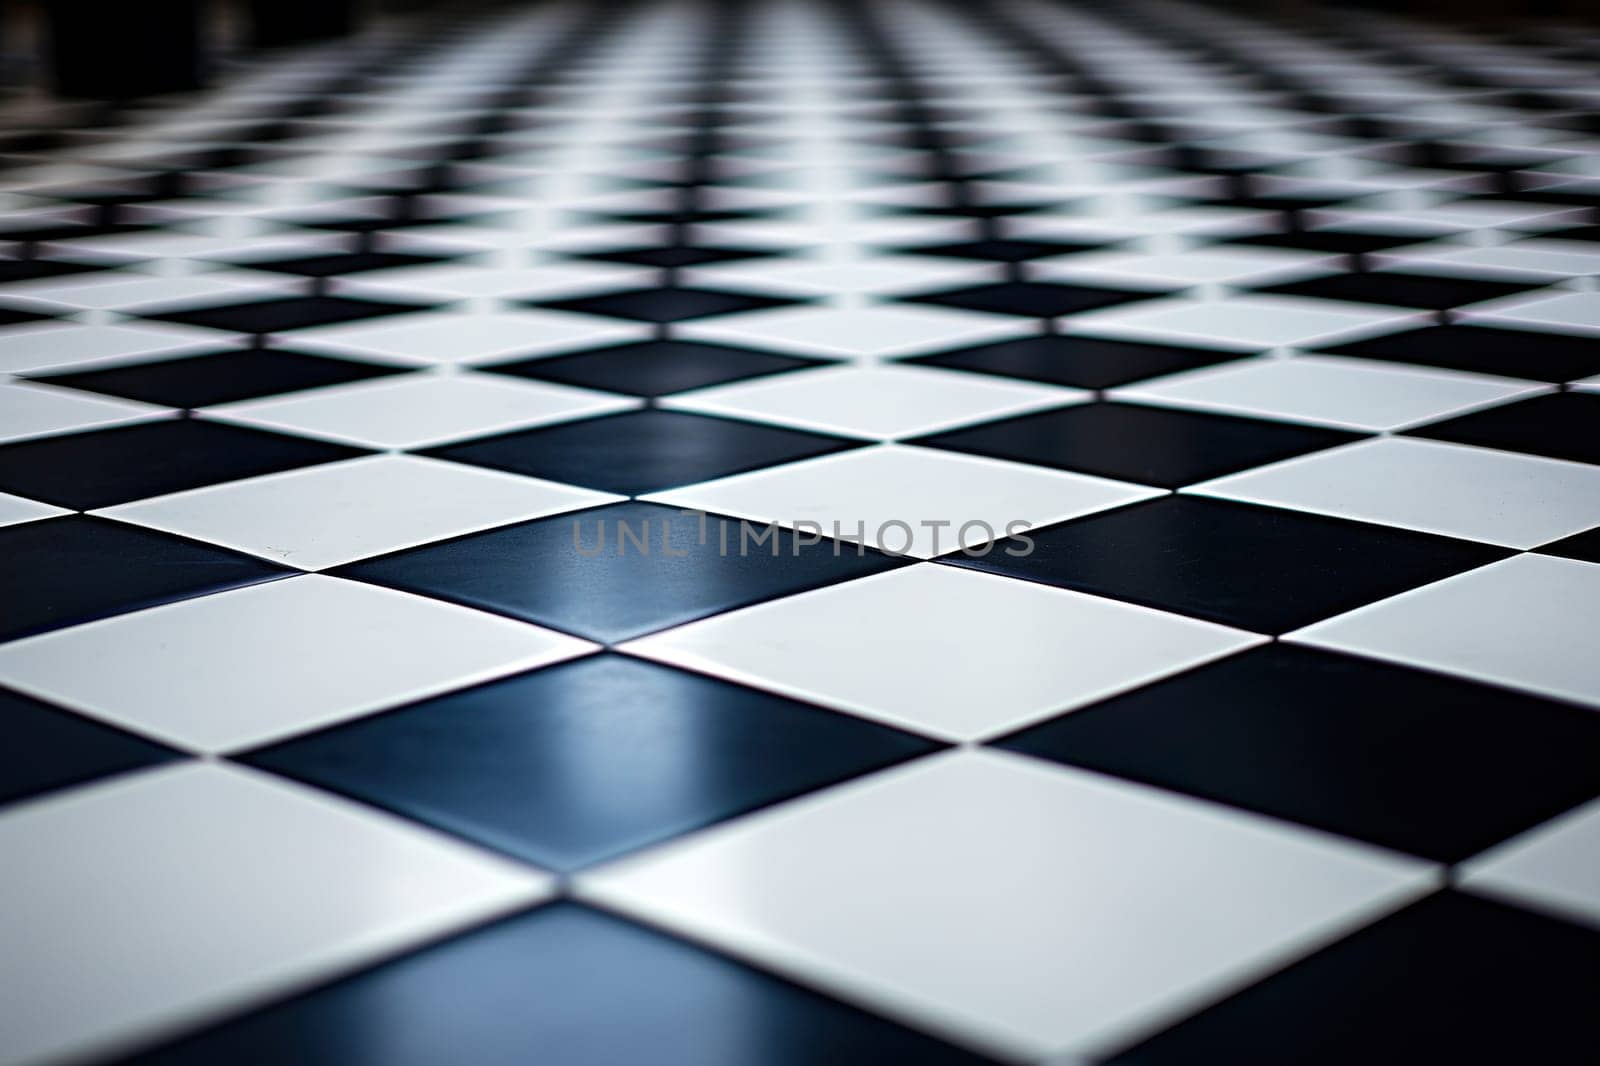 Checkerboard marble floor. The floor has a black and white diamond pattern. Generated by artificial intelligence by Vovmar